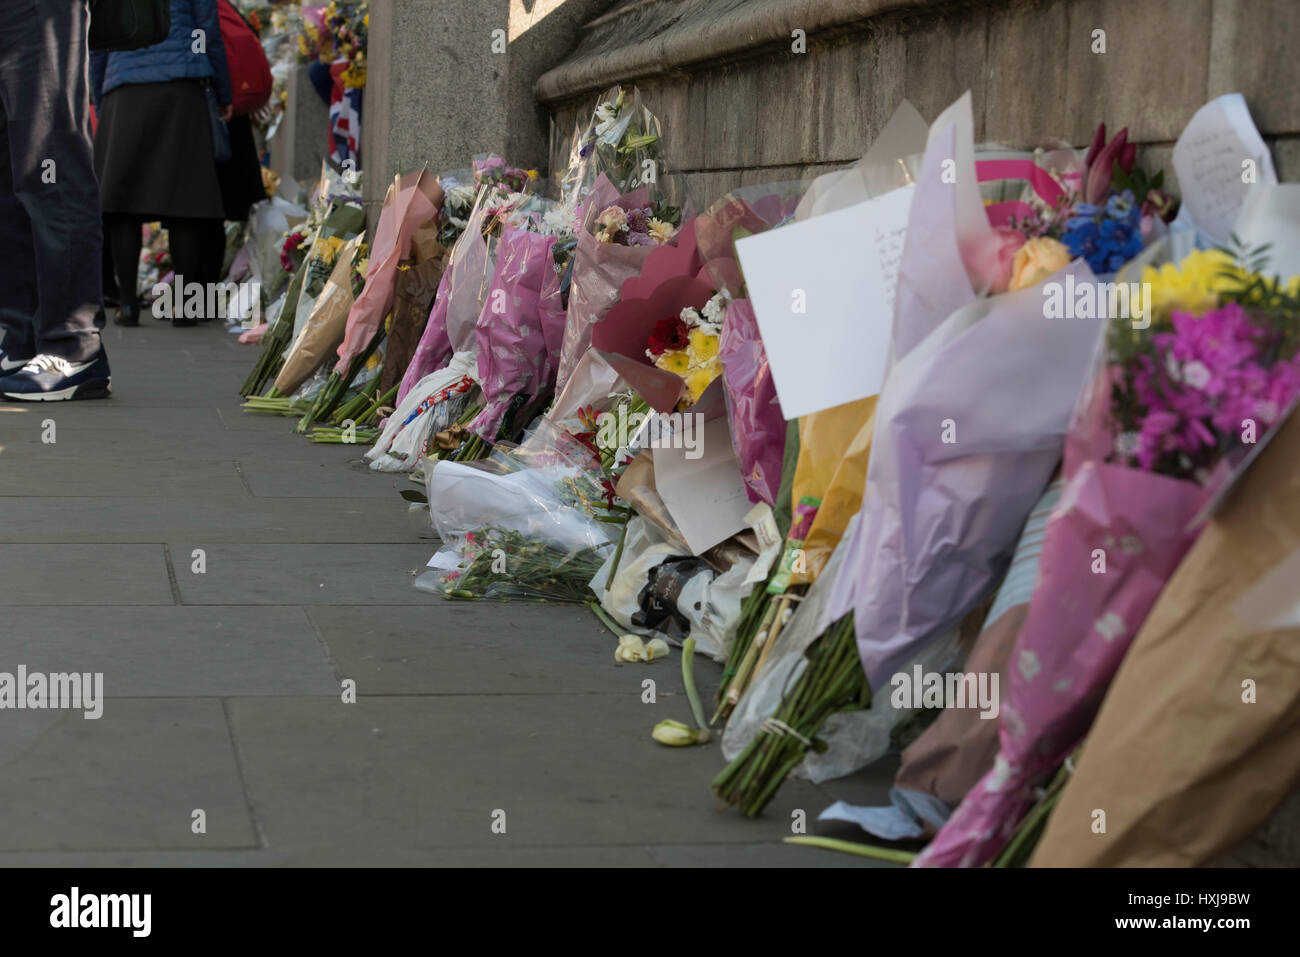 London, UK. 28th March 2017. Floral tributes outside the House of Commons following the Terror attack Credit: Ian Davidson/Alamy Live News Stock Photo